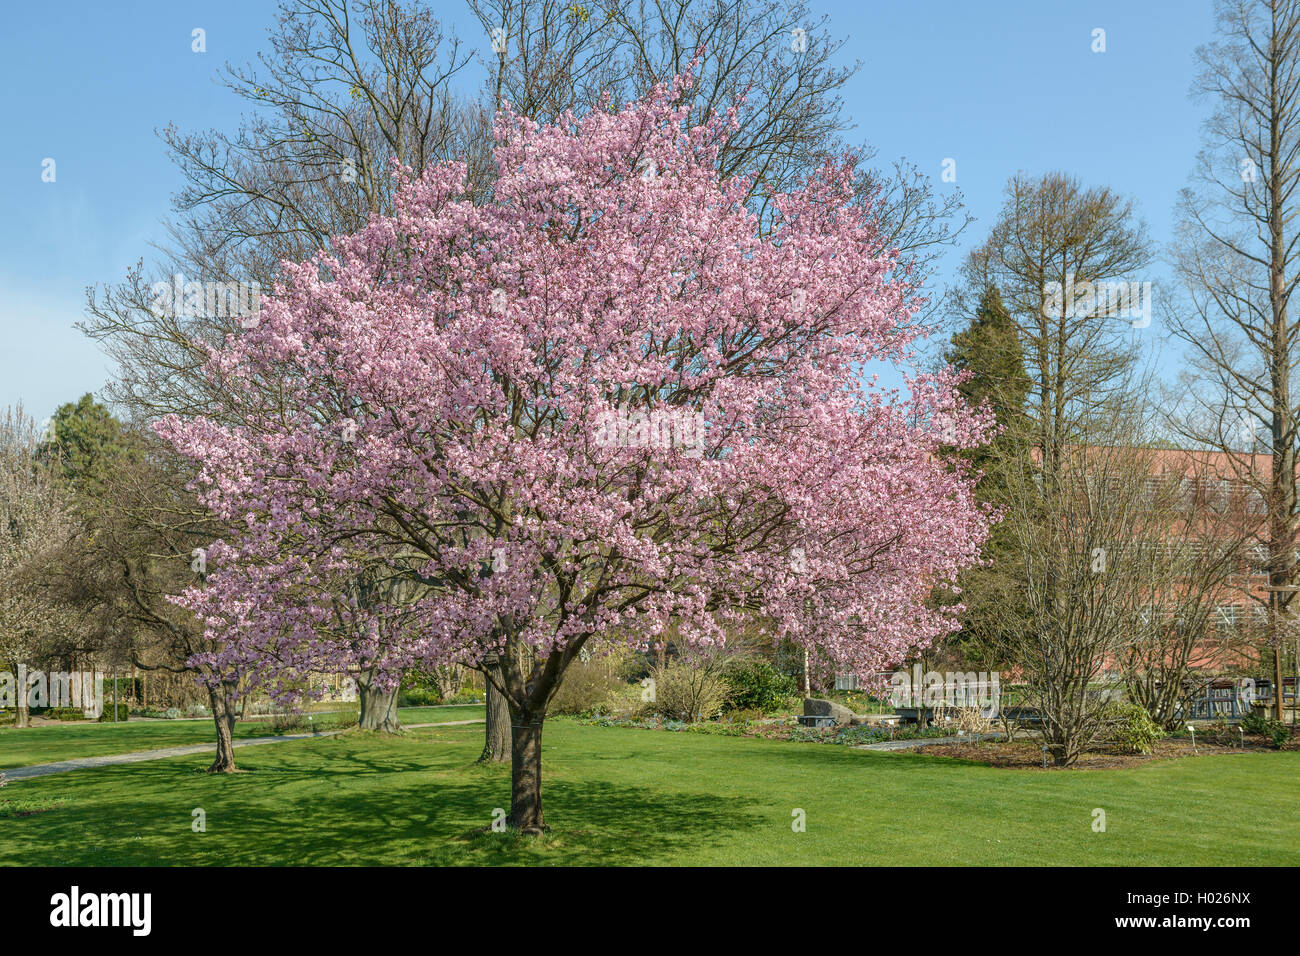 Sargent Cherry, Sargent's Cherry (Prunus sargentii), blooming in a park Stock Photo